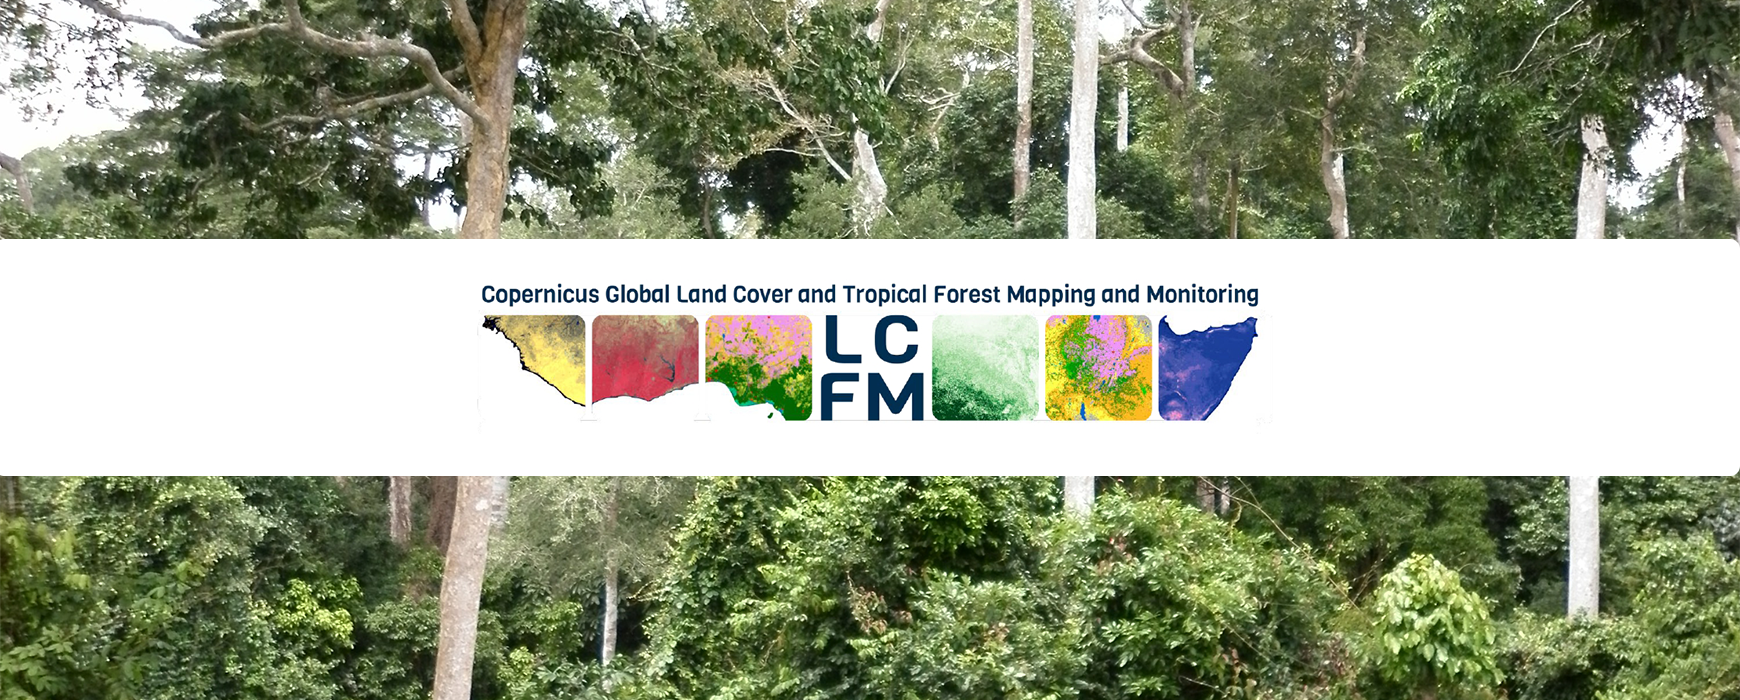 IGN FI at the heart of the New Copernicus Service Global mapping and monitoring of land cover and tropical forests (LCFM)